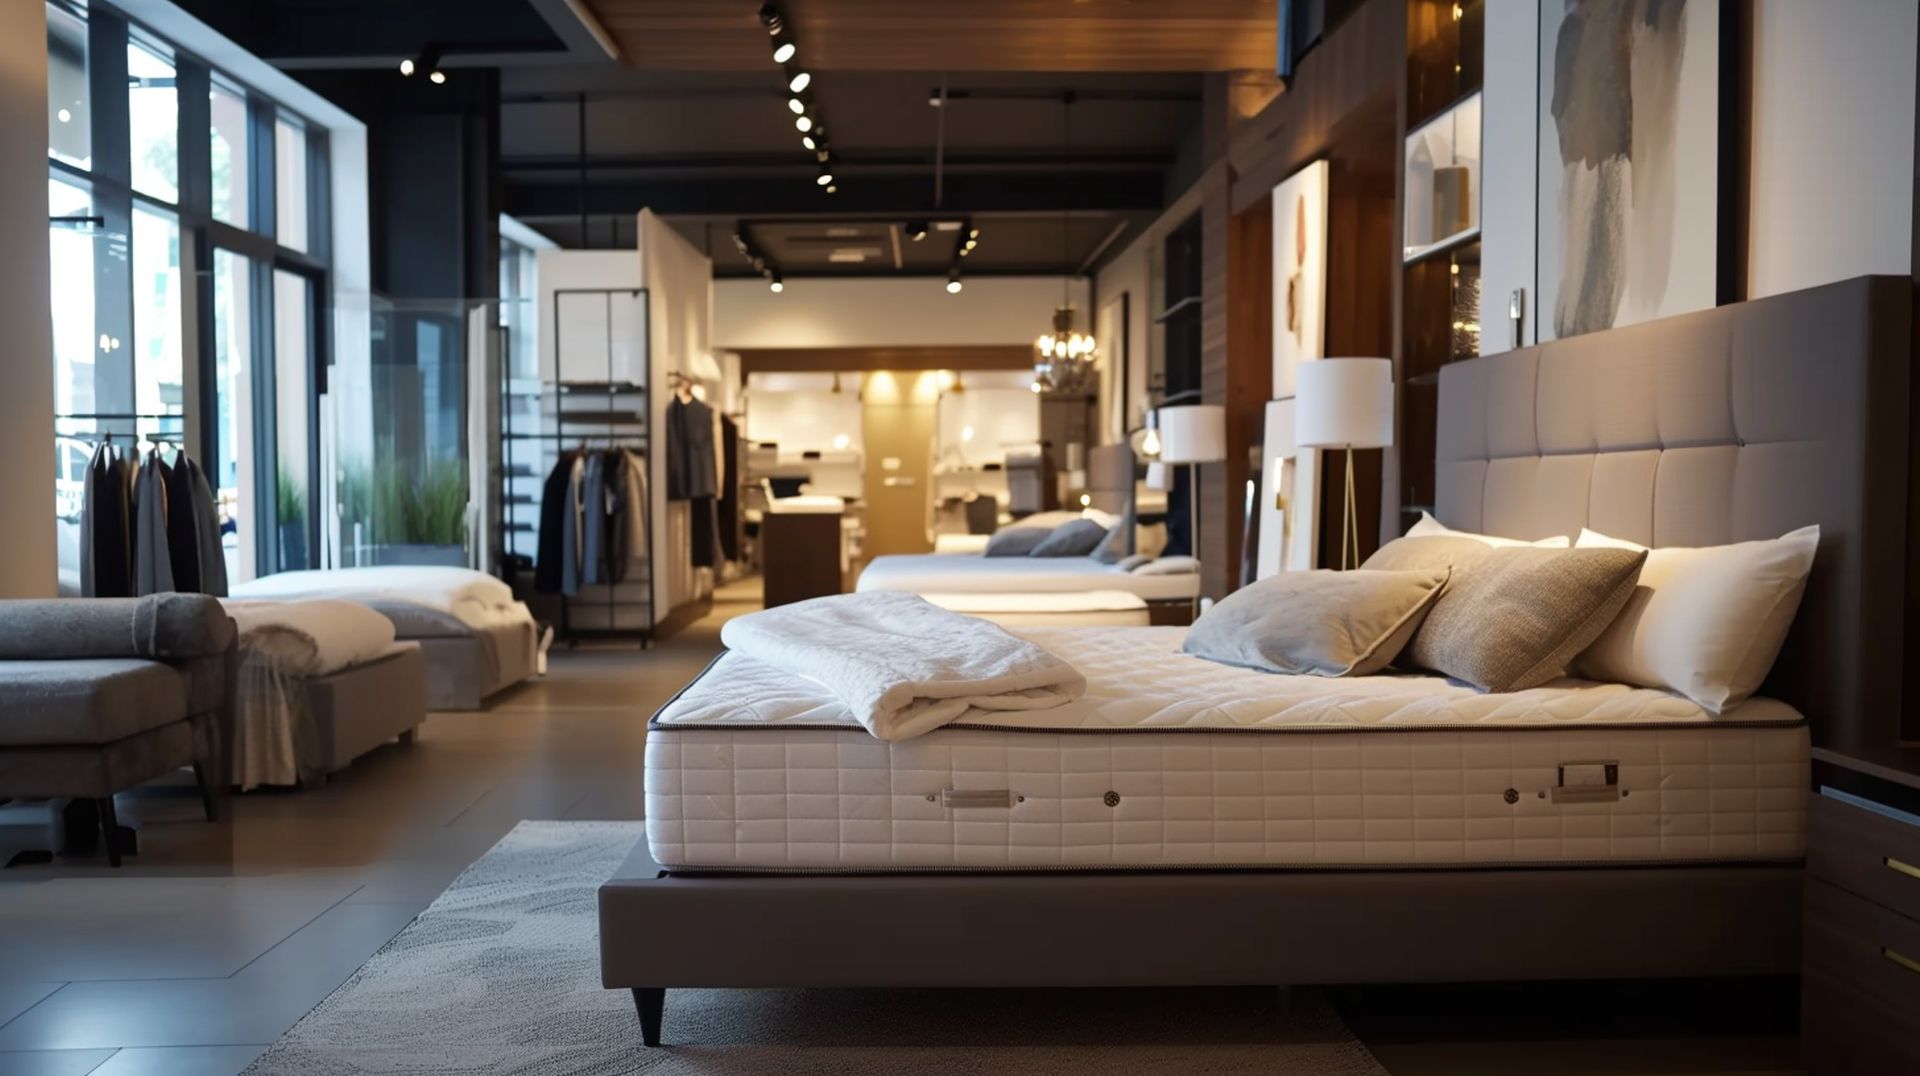 If you're looking for a new bed, mattress stores in Huntsville offer the best customer and delivery service, financing, and warranties in Texas